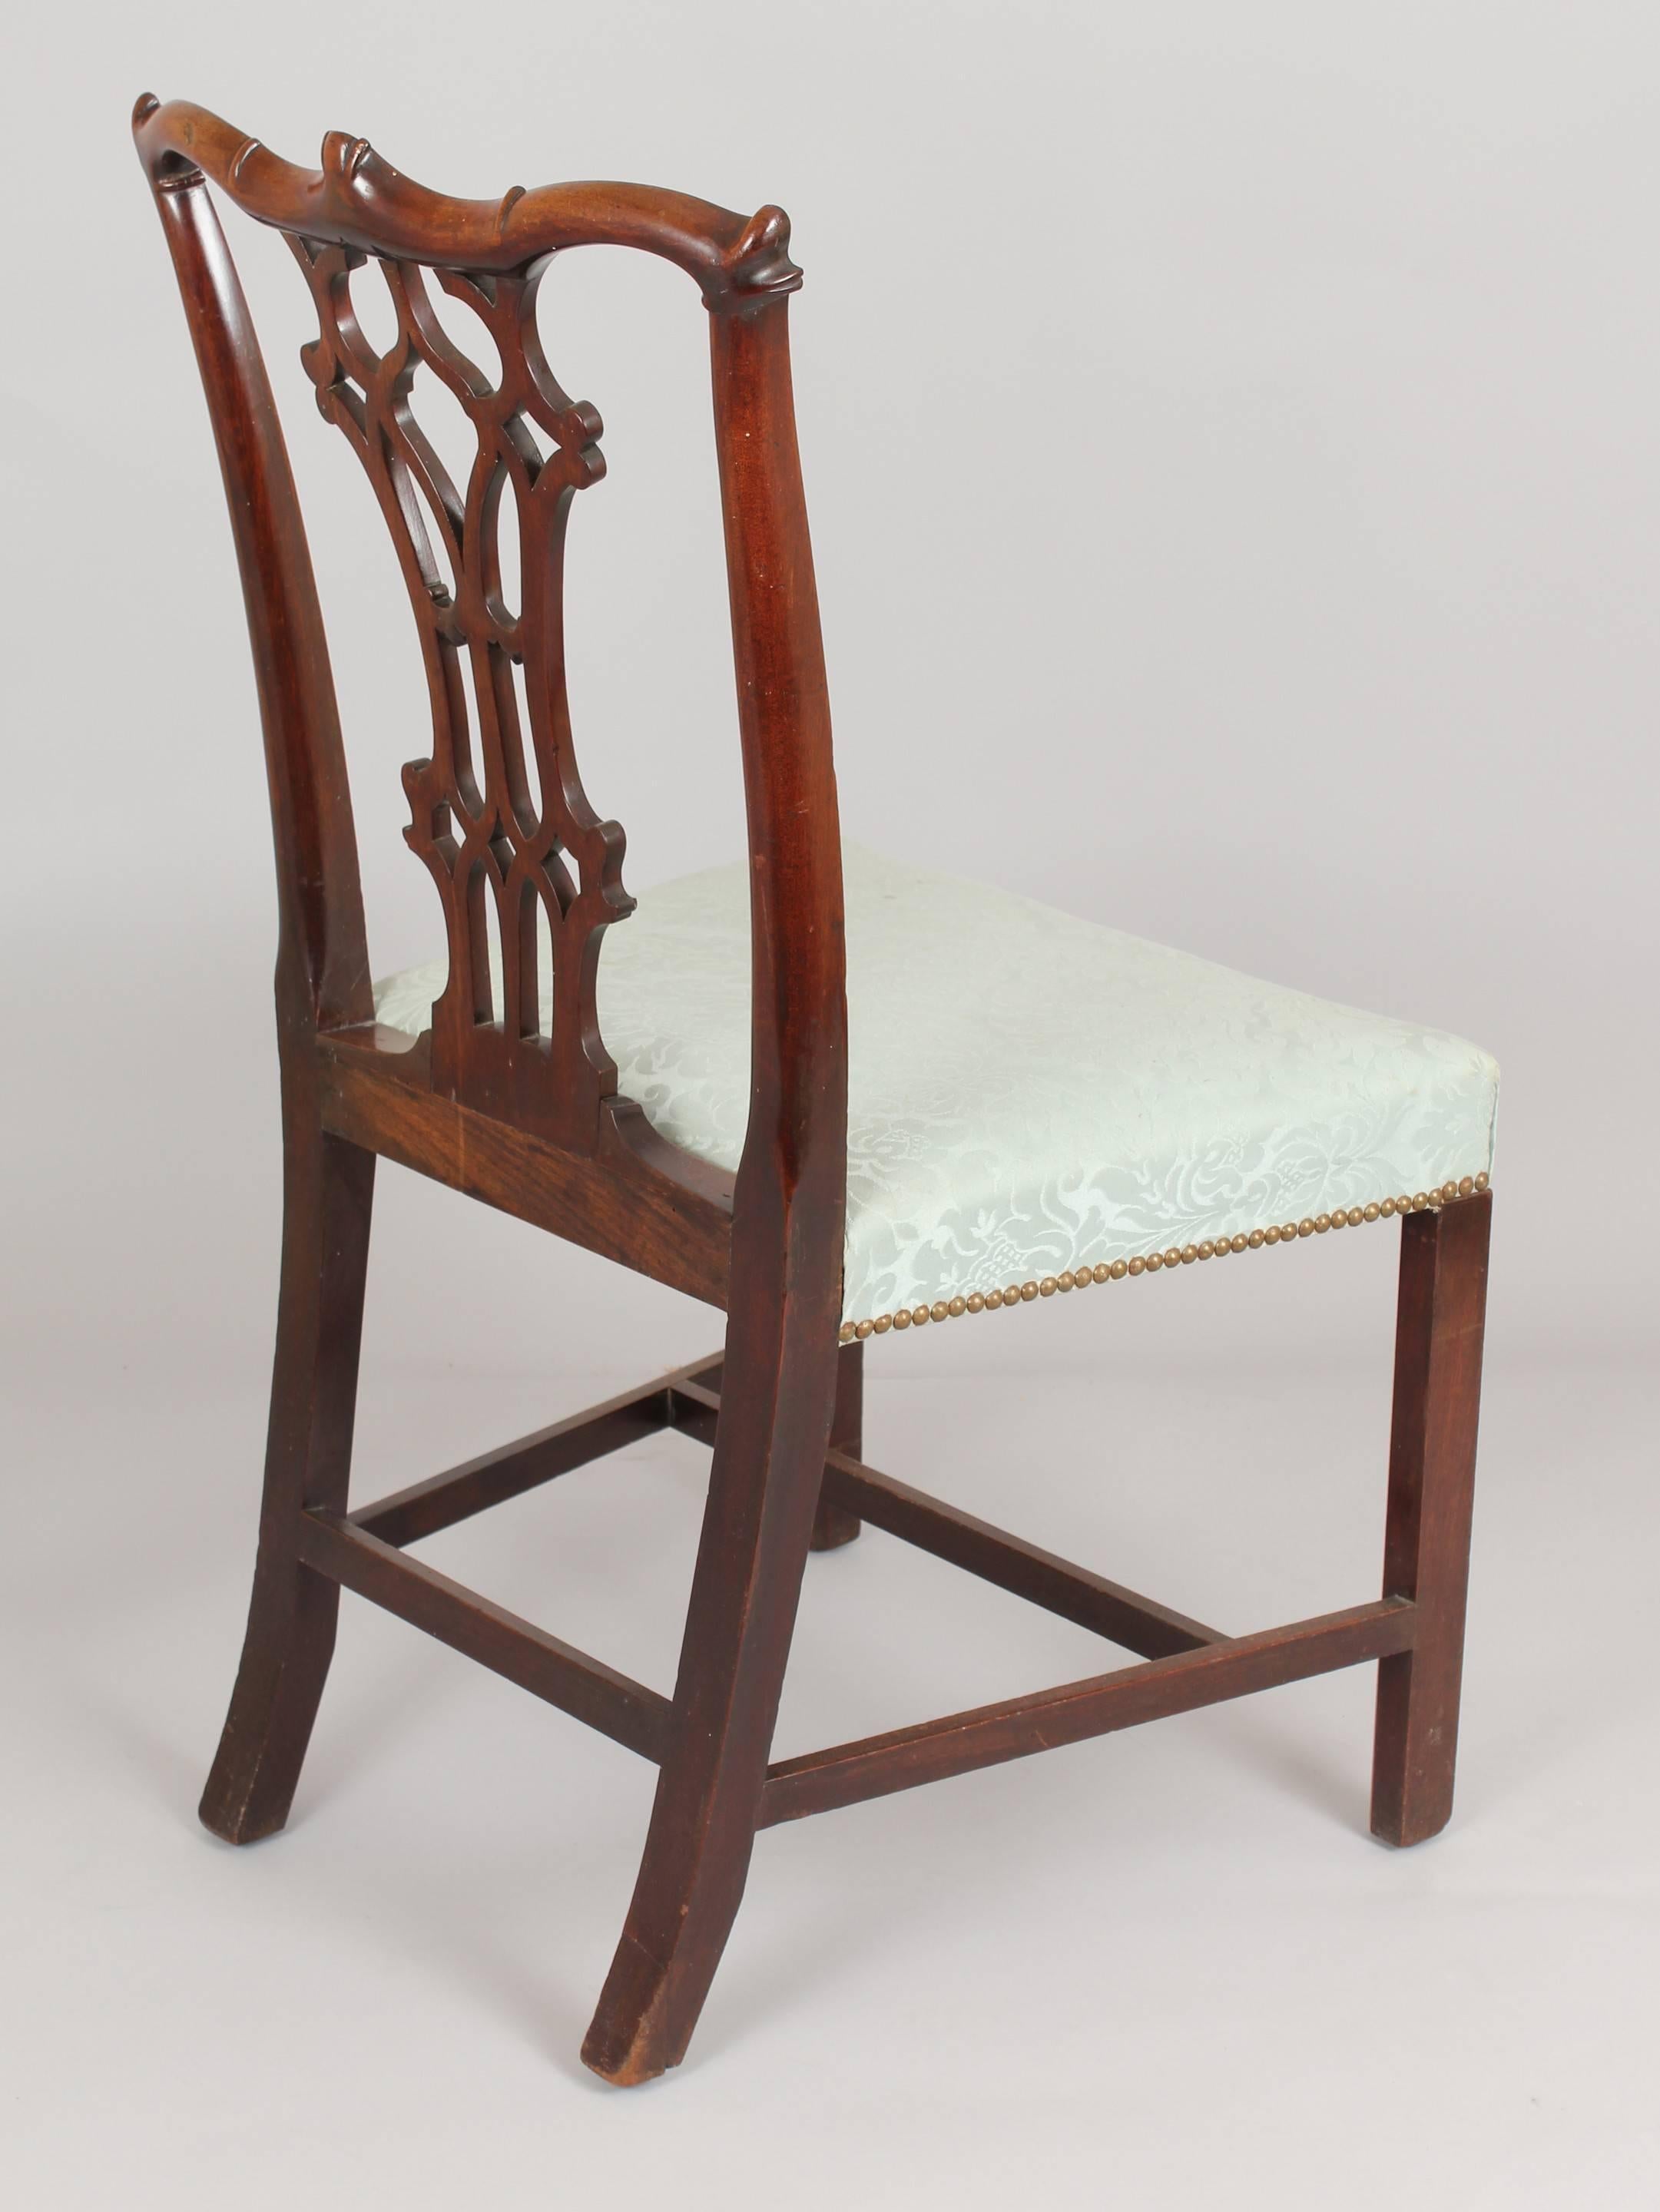 A fine pair of George III period mahogany side-chairs in the Chippendale manner with carved Gothic style splats and shaped cresting-rails; the stuff-over seats covered in green damask and on chamfered legs with stretchers.